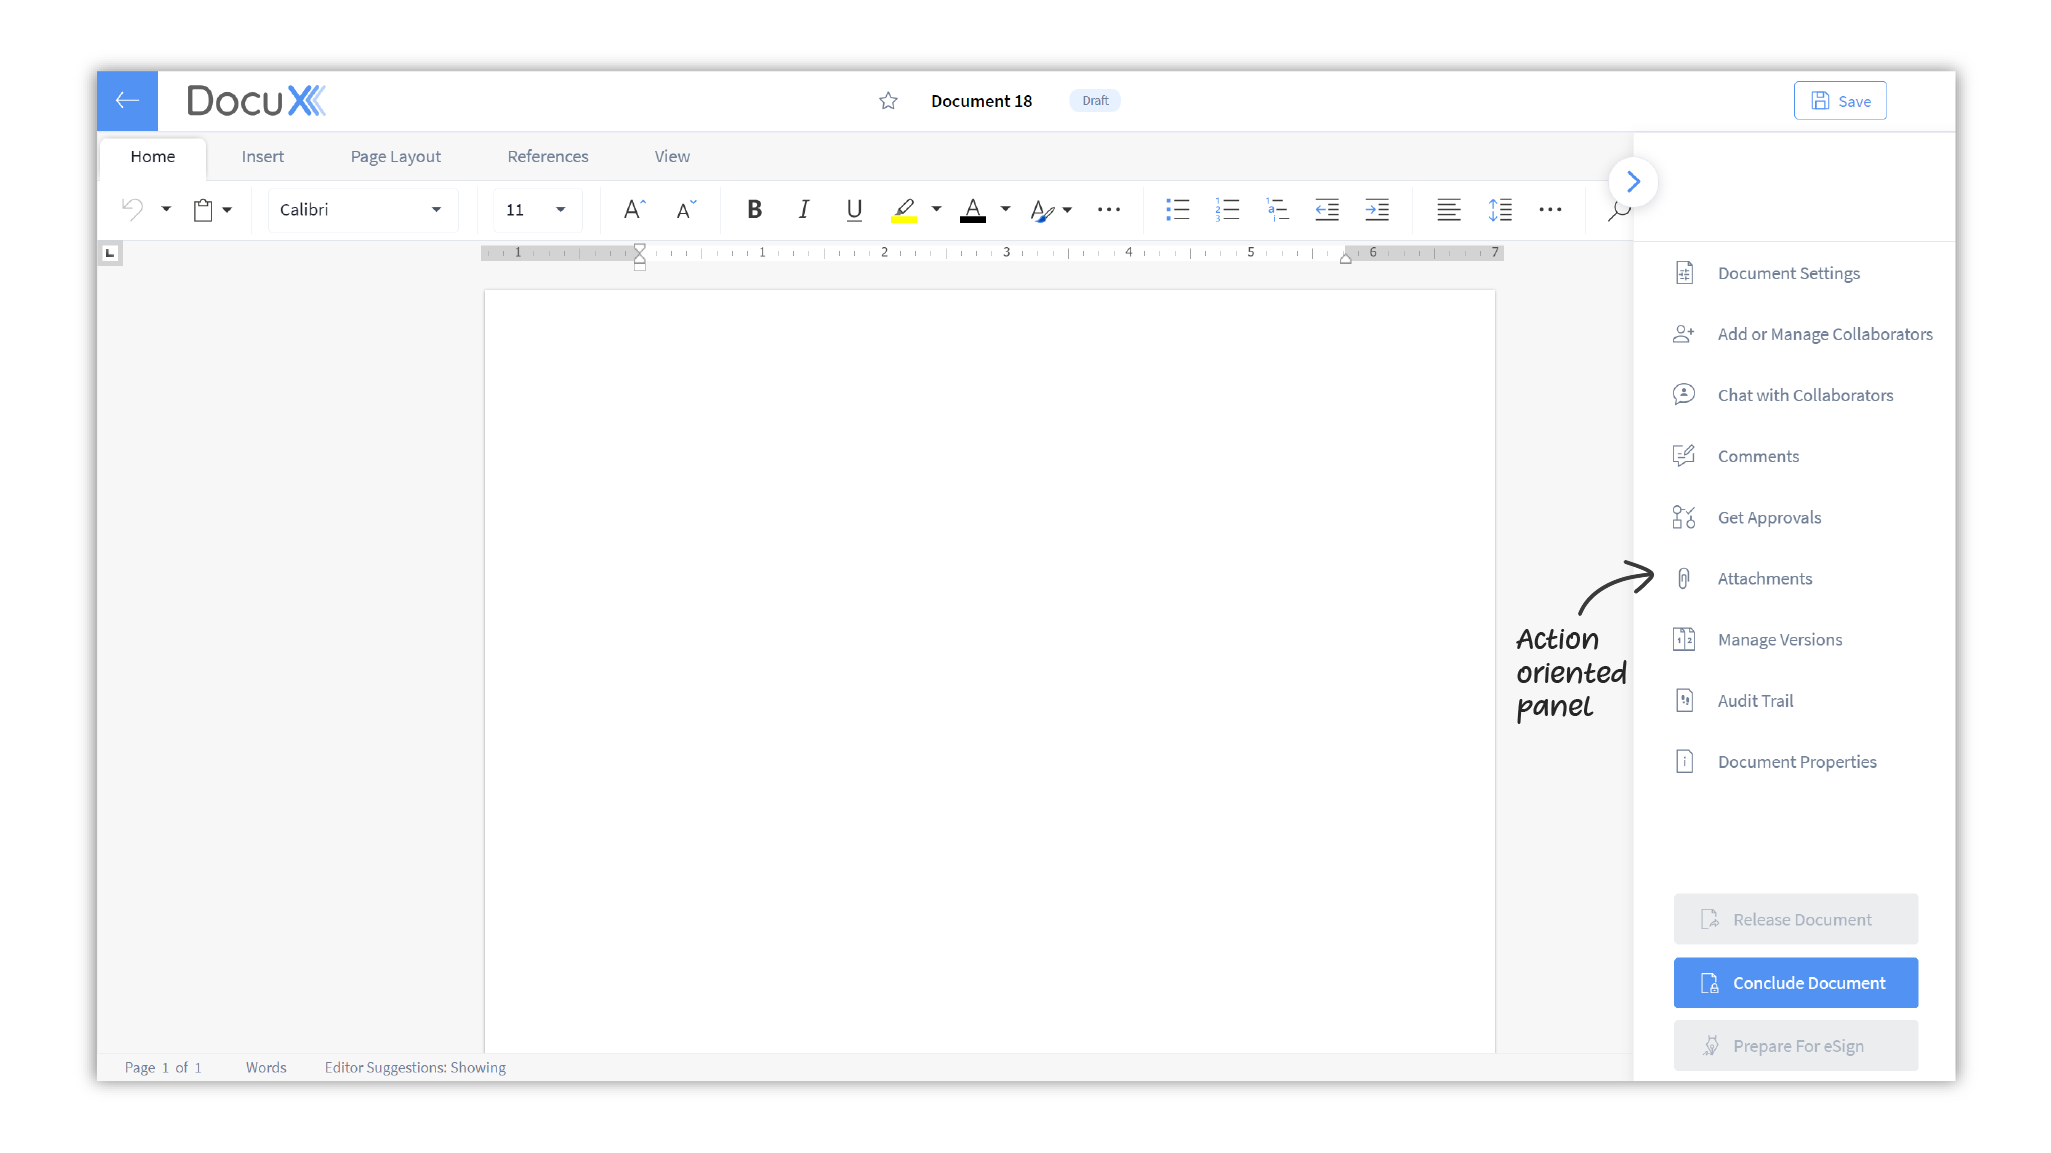 Action panel on the right of the document editor includes additional control and collaboration features